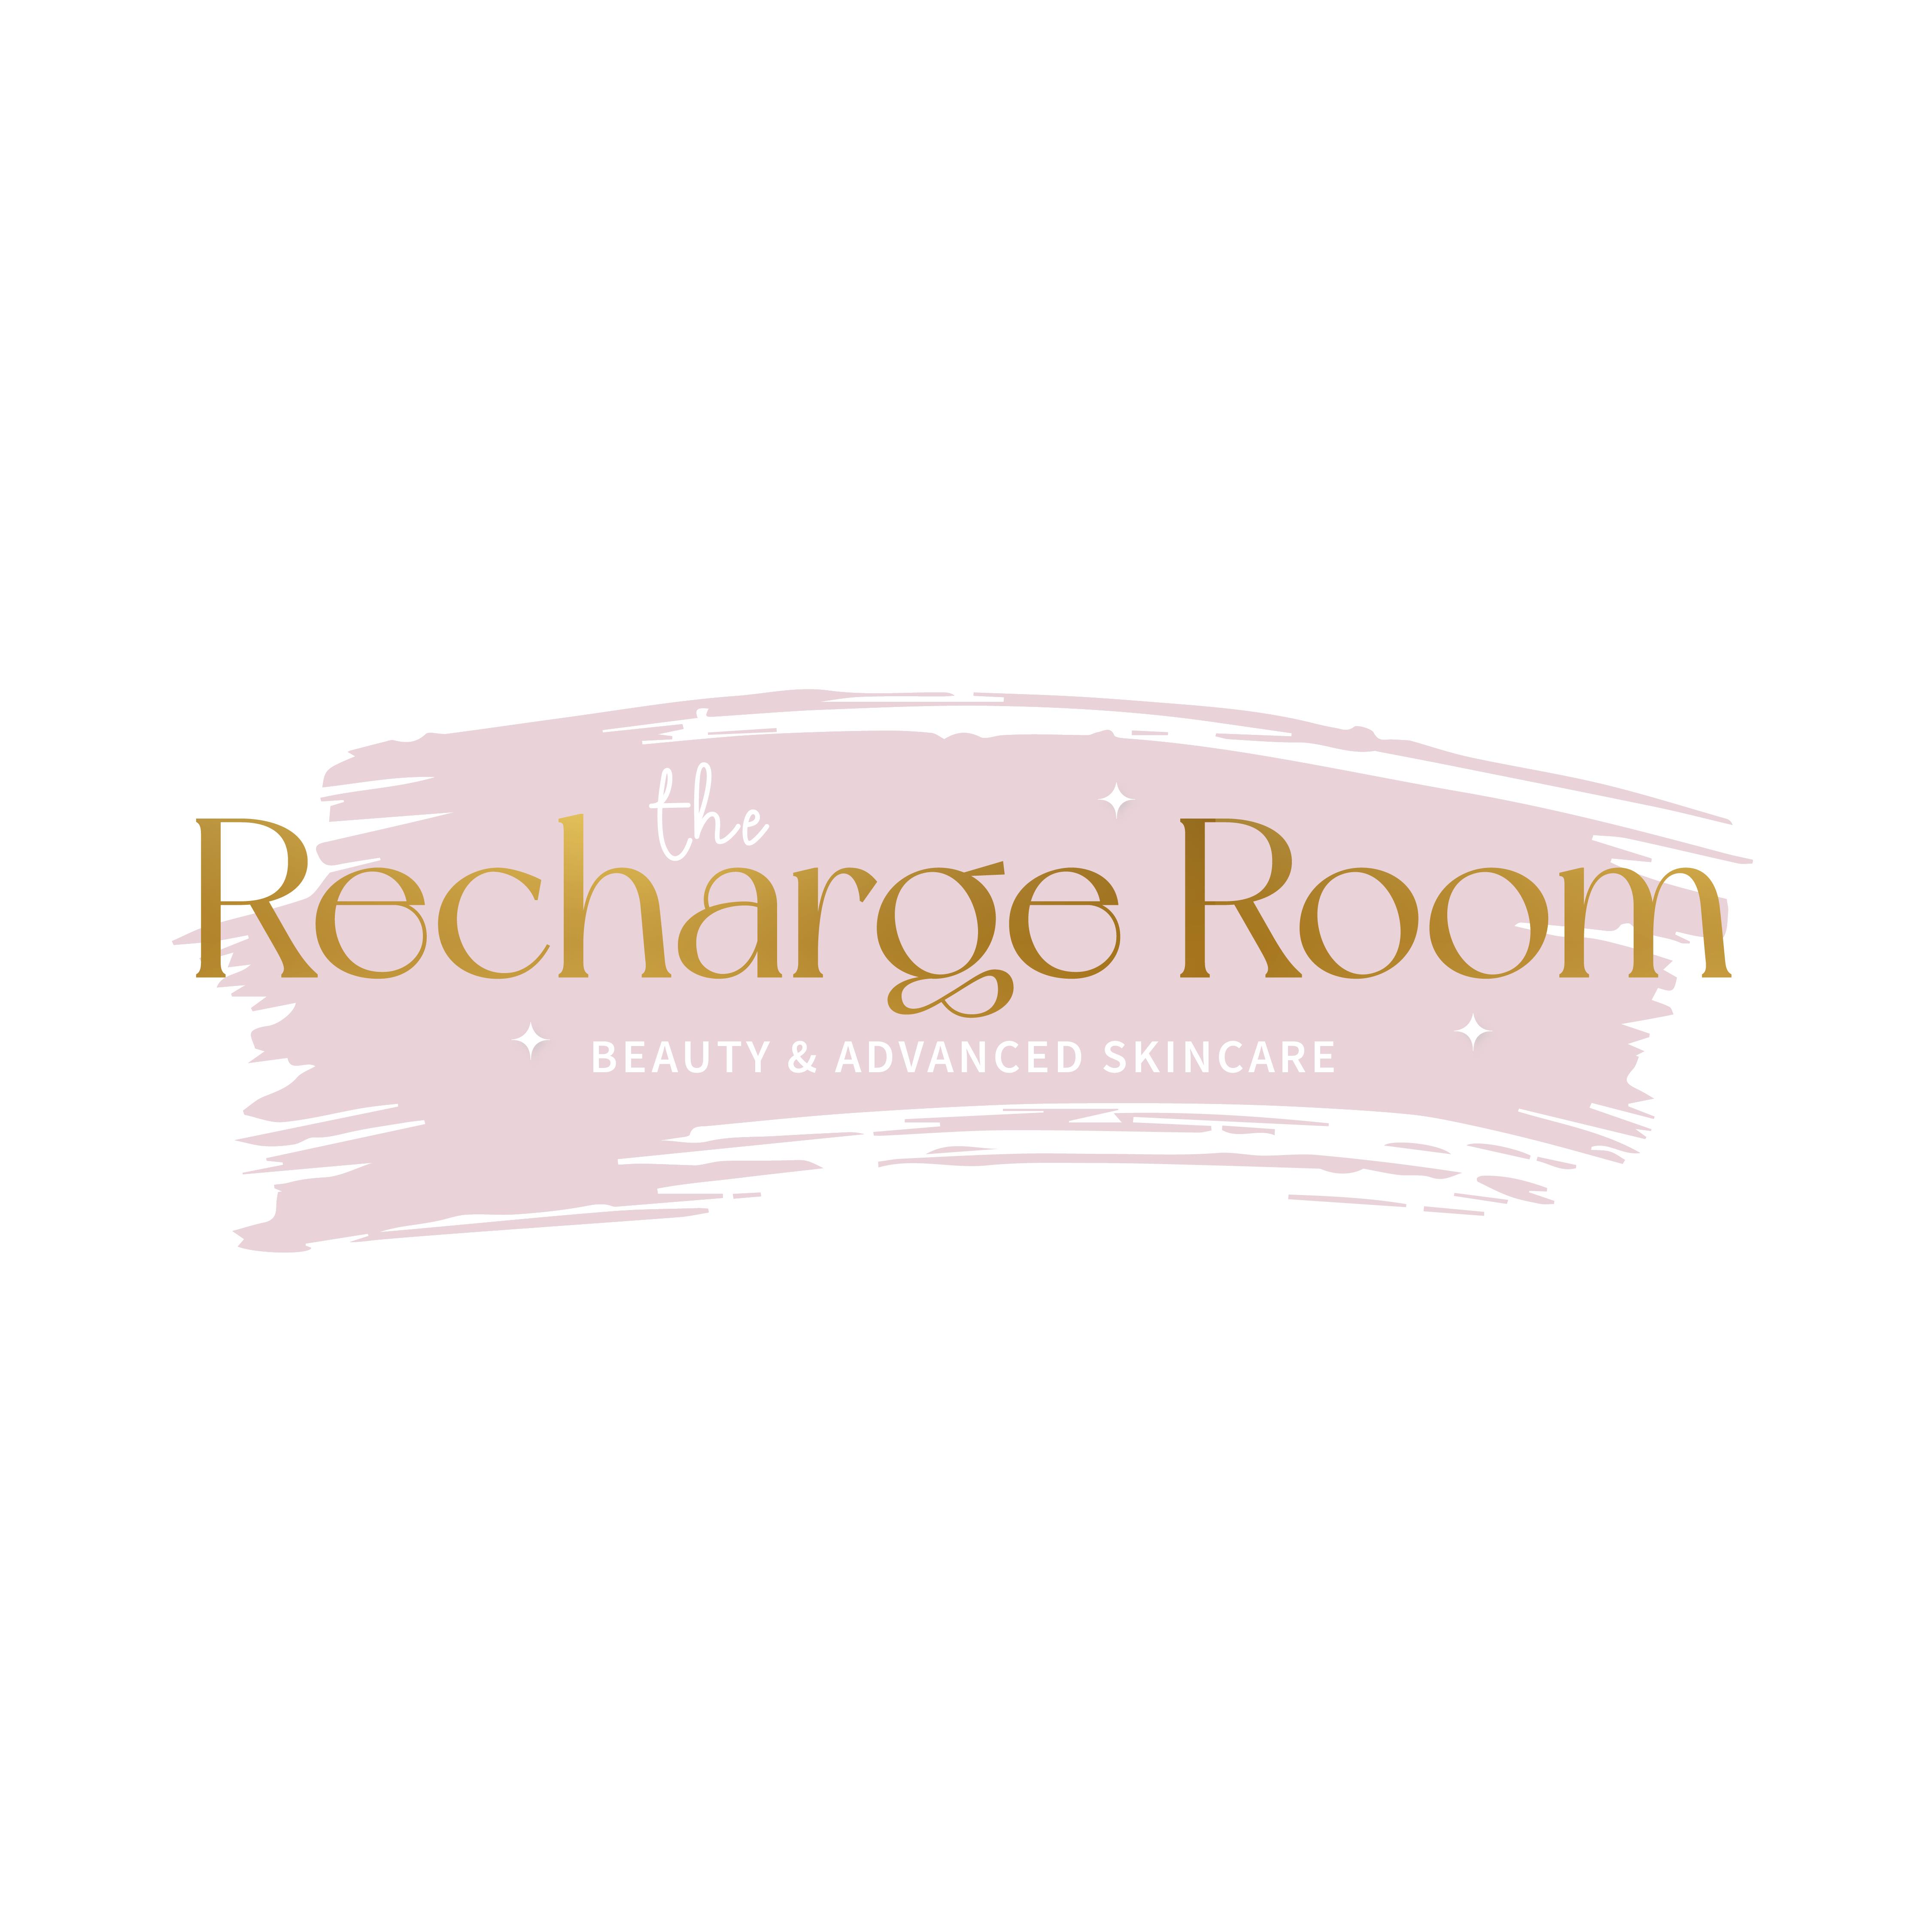 The Recharge Room